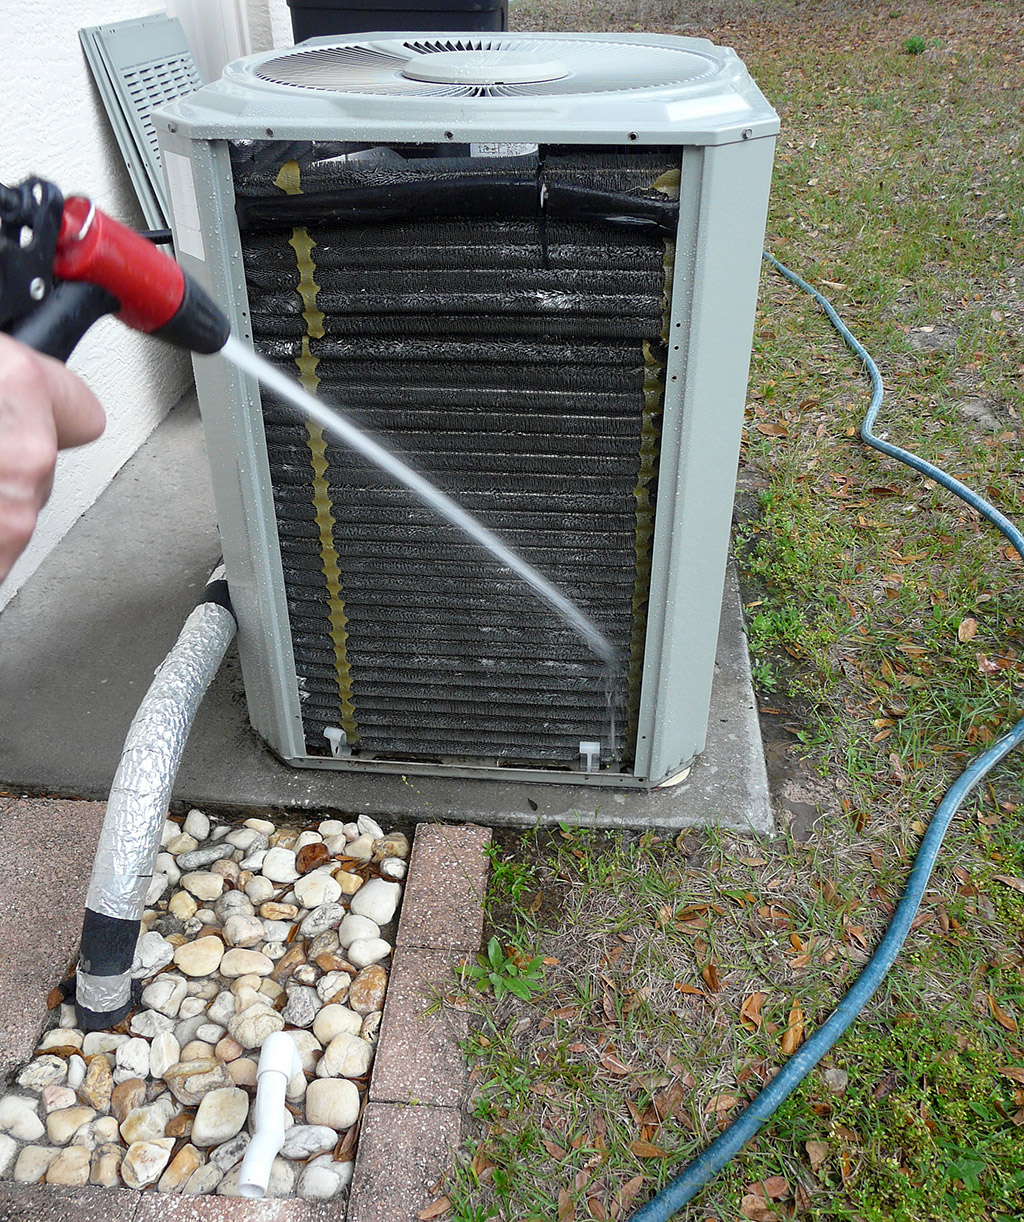 Is Your HVAC System Inviting Pests into Your Home? Time to Call a Heating and Air Condition Service in Dallas, TX